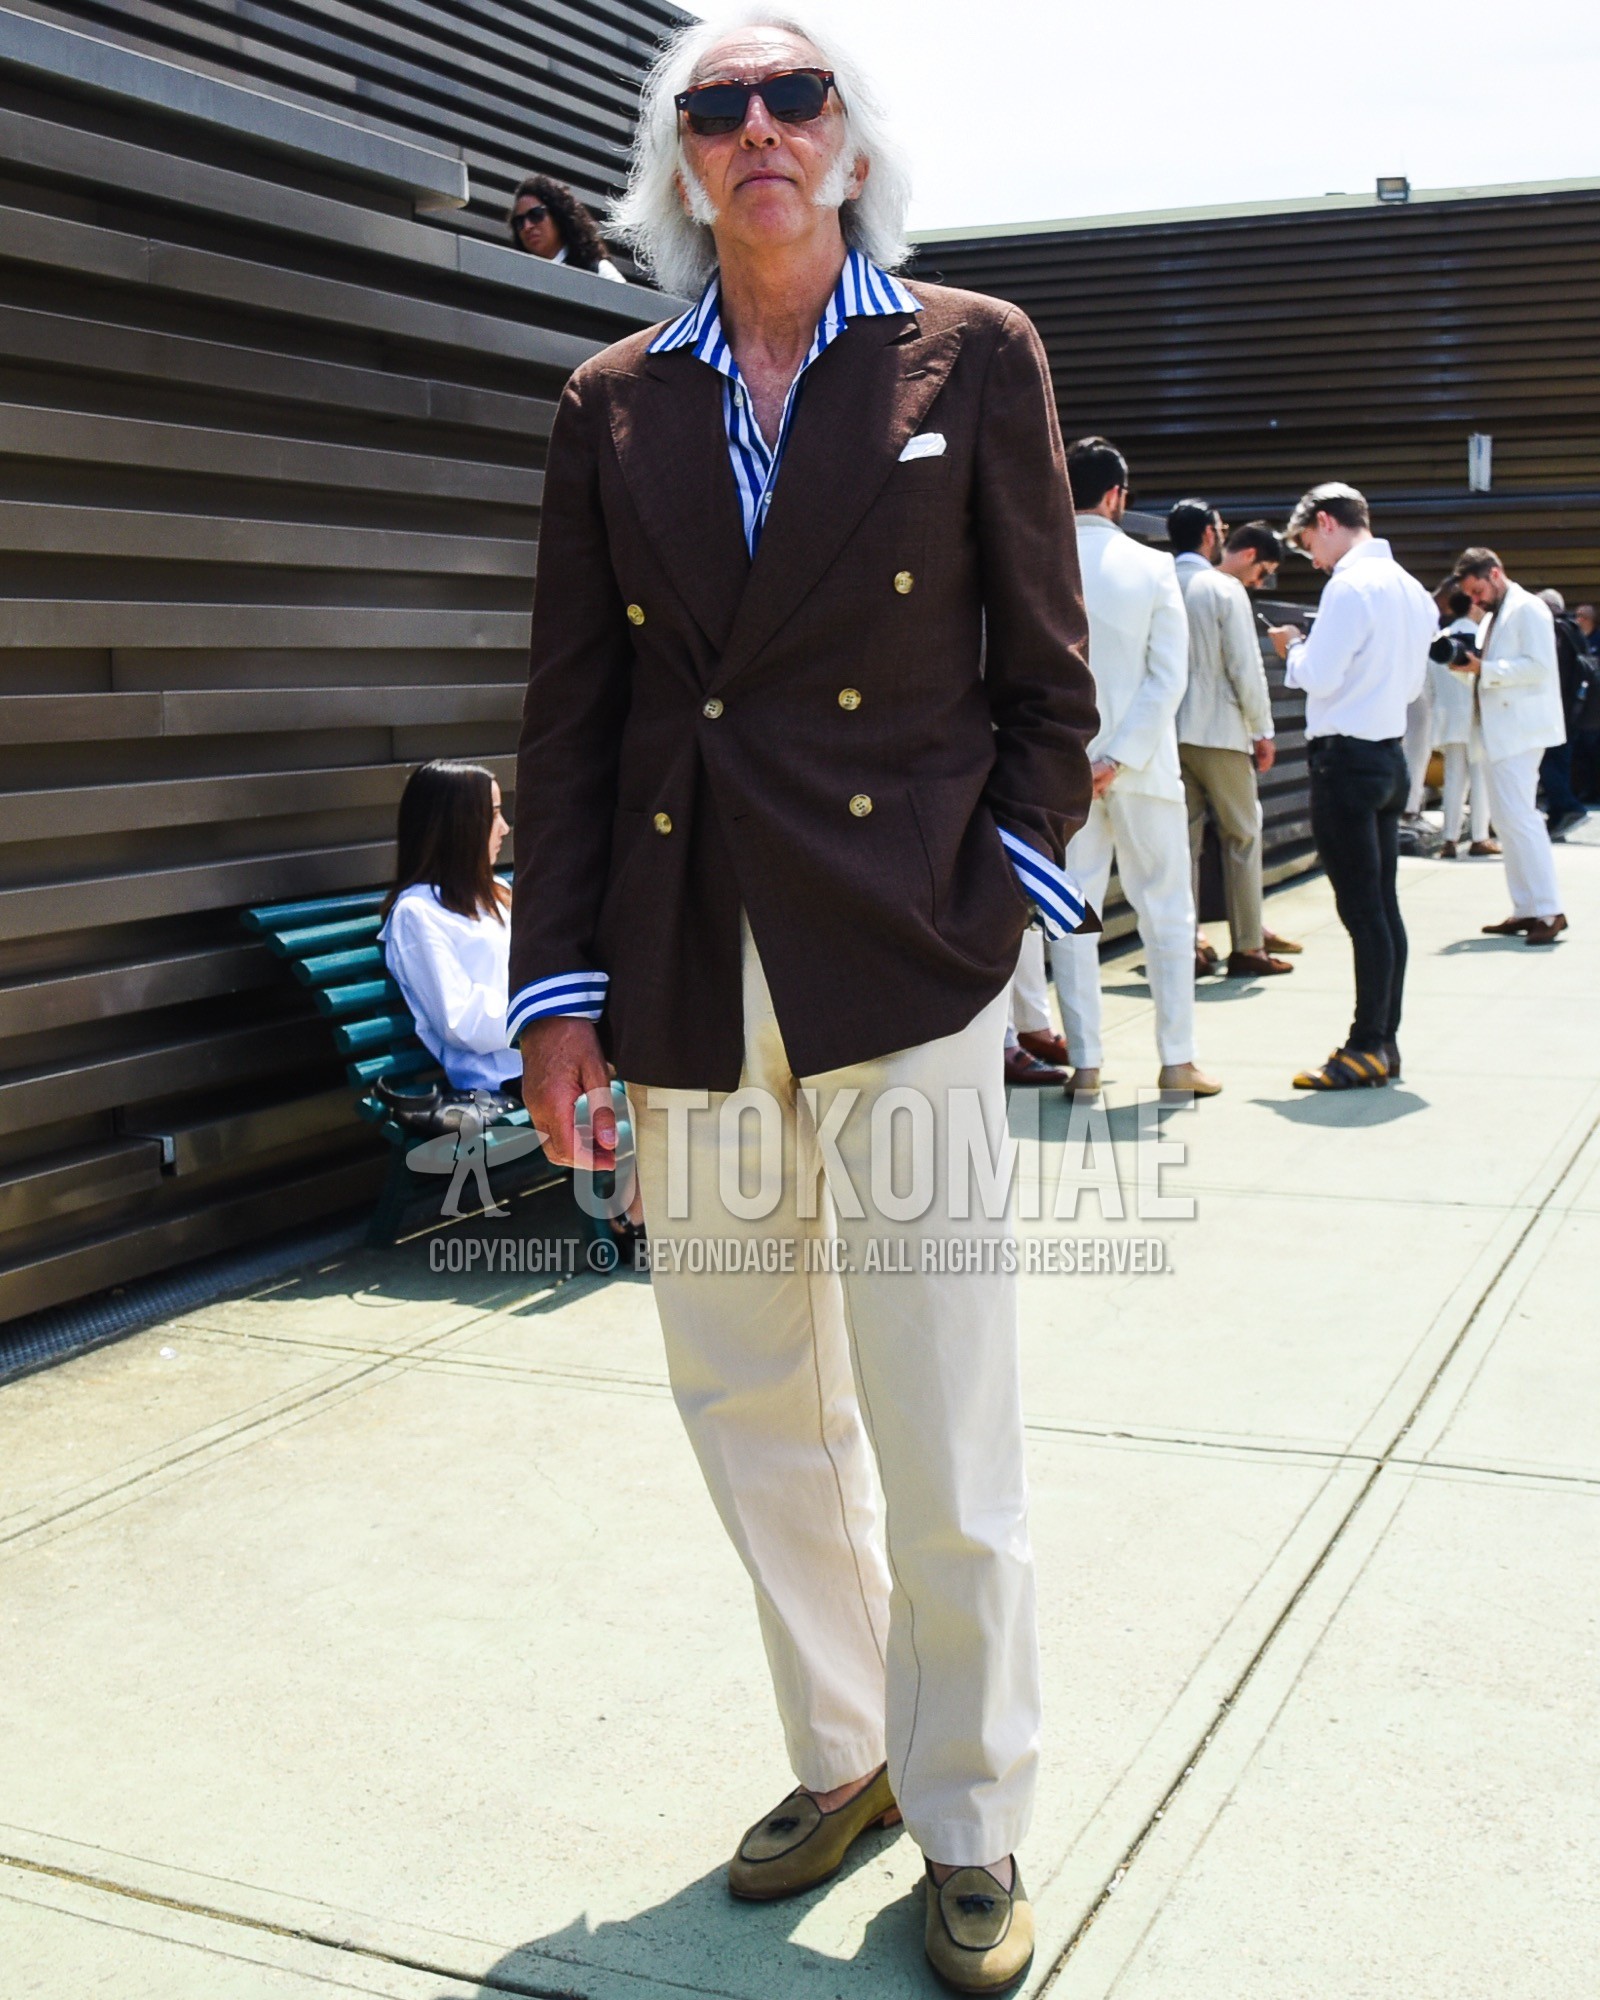 Men's spring summer outfit with brown tortoiseshell sunglasses, brown plain tailored jacket, navy white stripes shirt, beige plain slacks, green  loafers leather shoes.